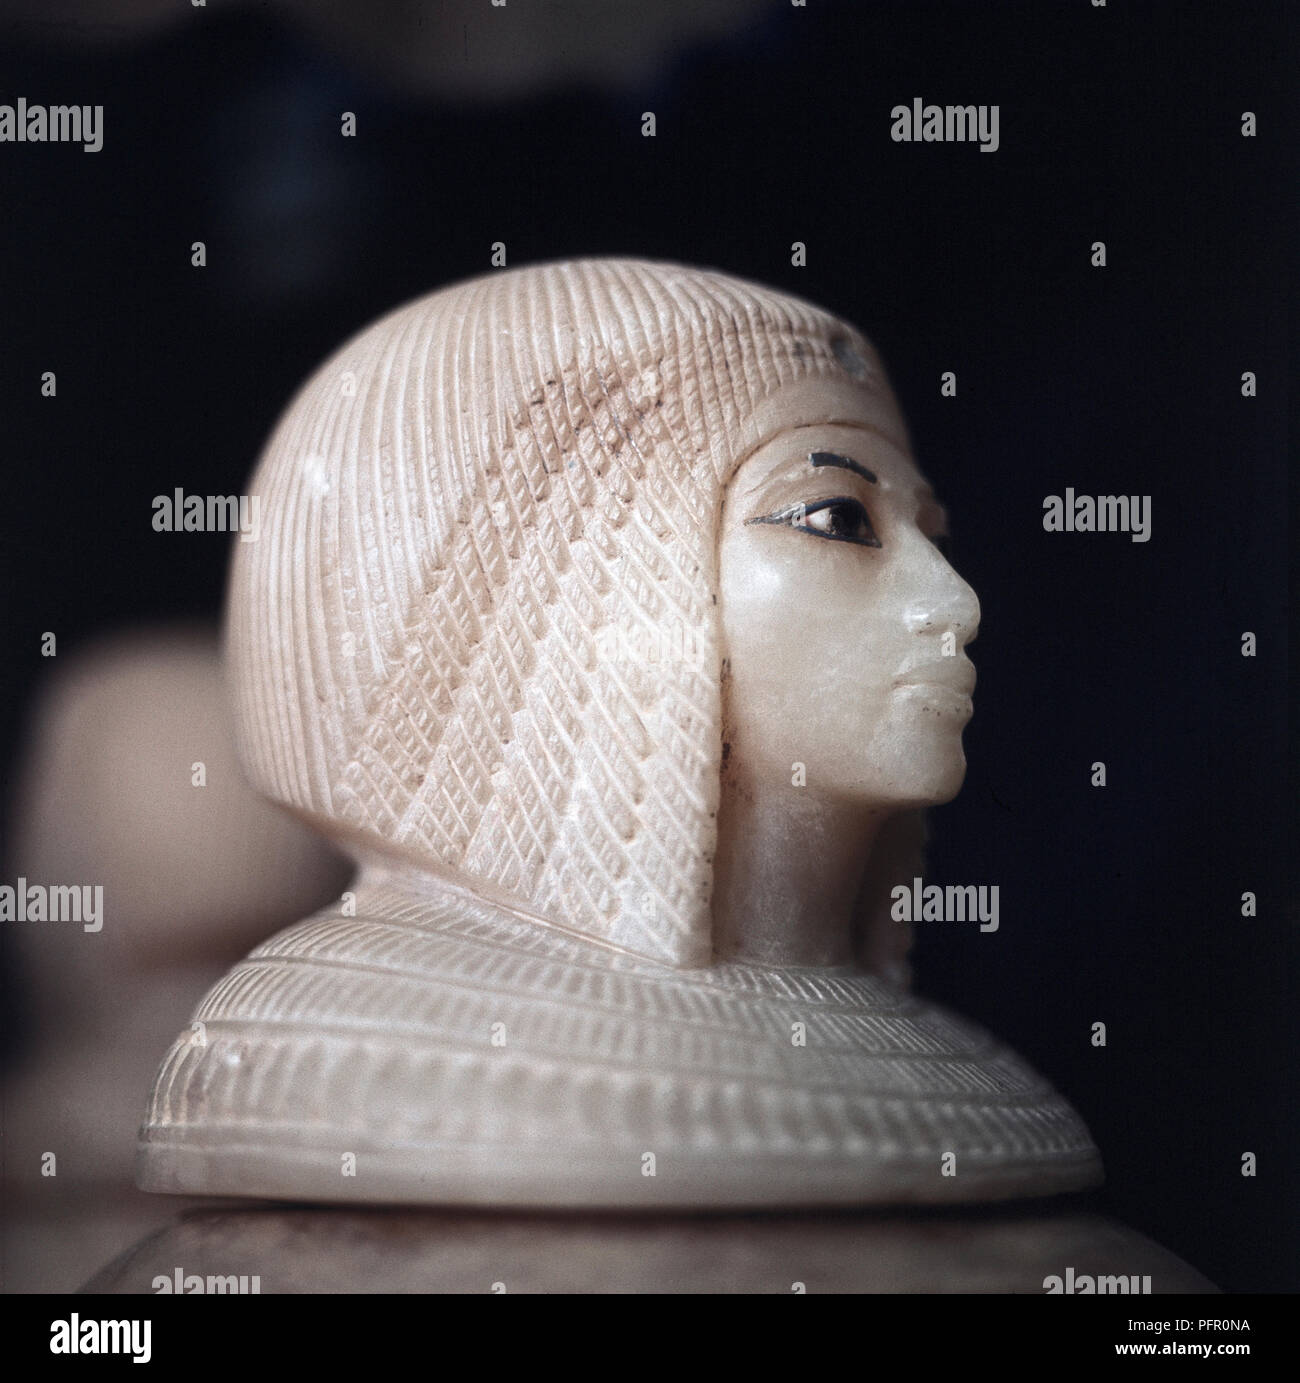 egyptian Alamy photography images - hi-res stock Ancient and queen